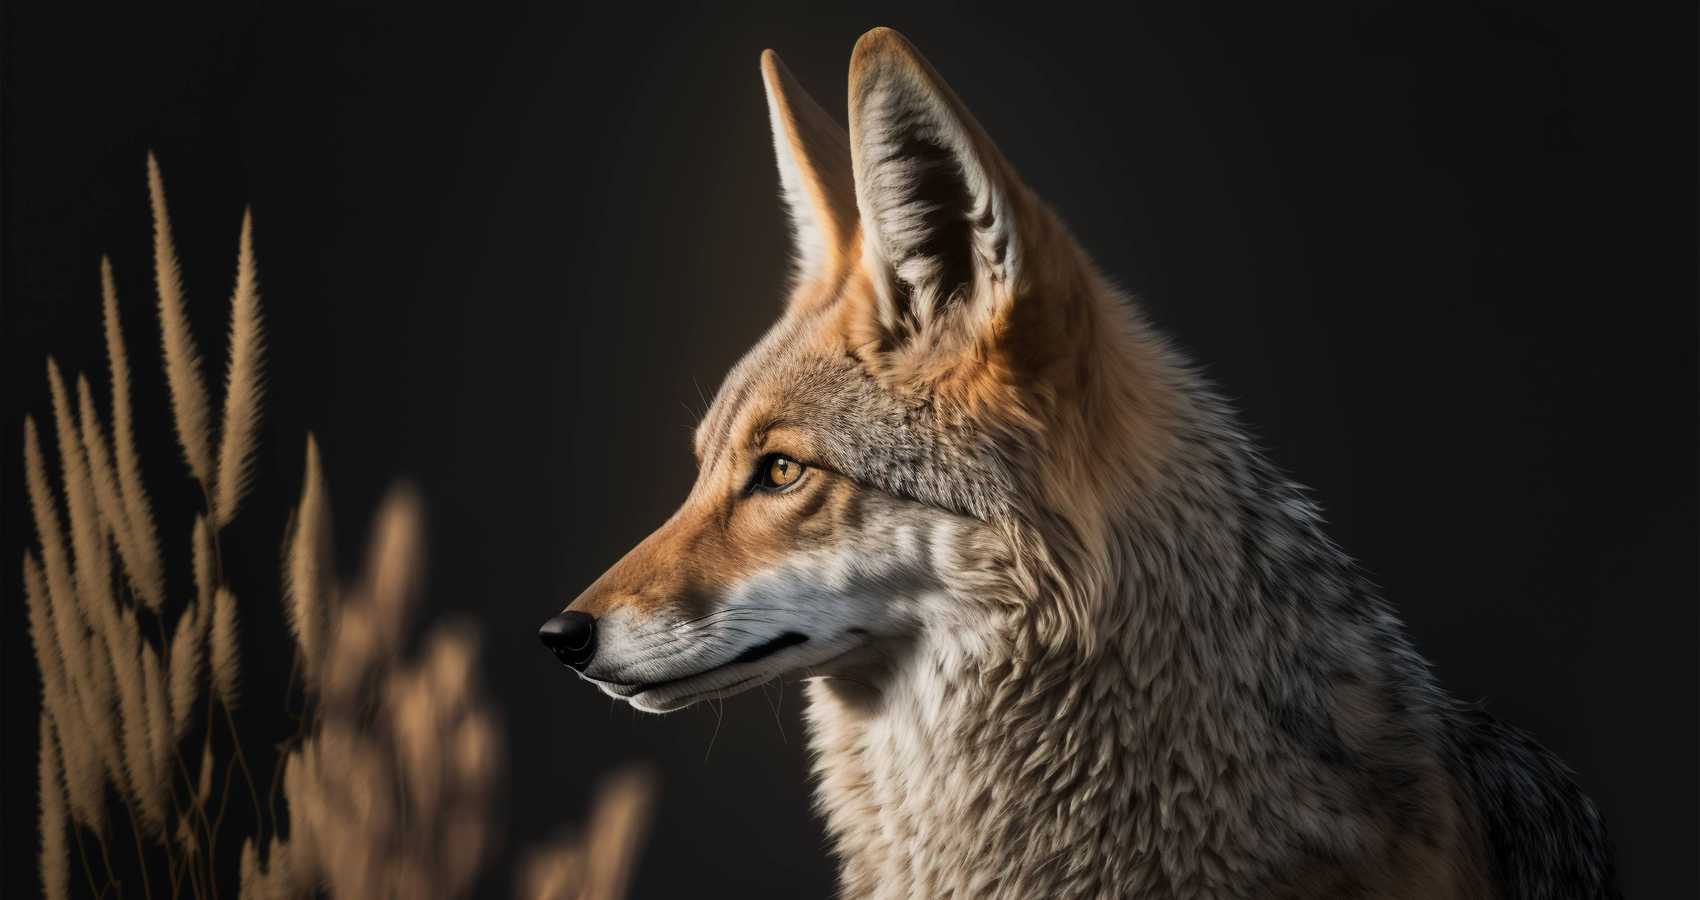 Coyotes, short story by Alan David Gould at Spillwords.com